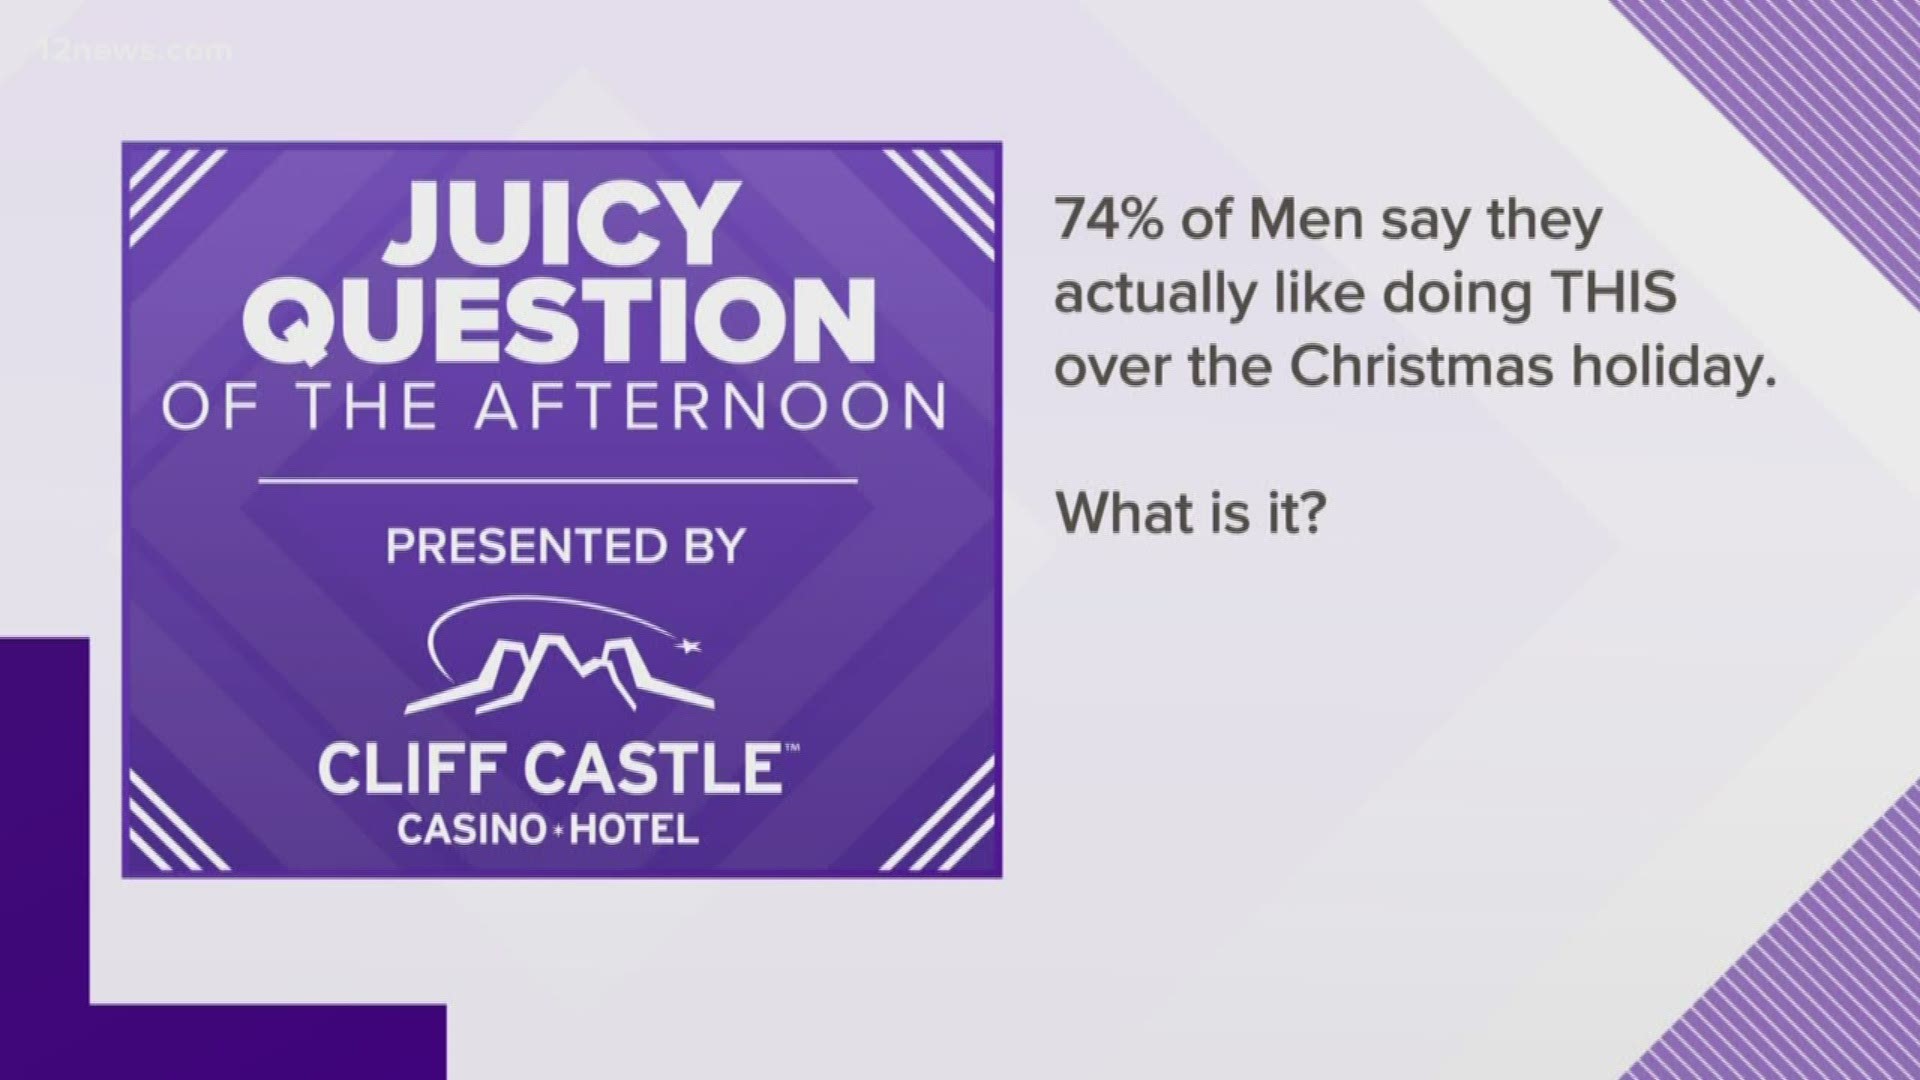 Juicy question of the afternoon: 74 percent of men say they actually enjoy doing this over the Christmas holiday. What is it?